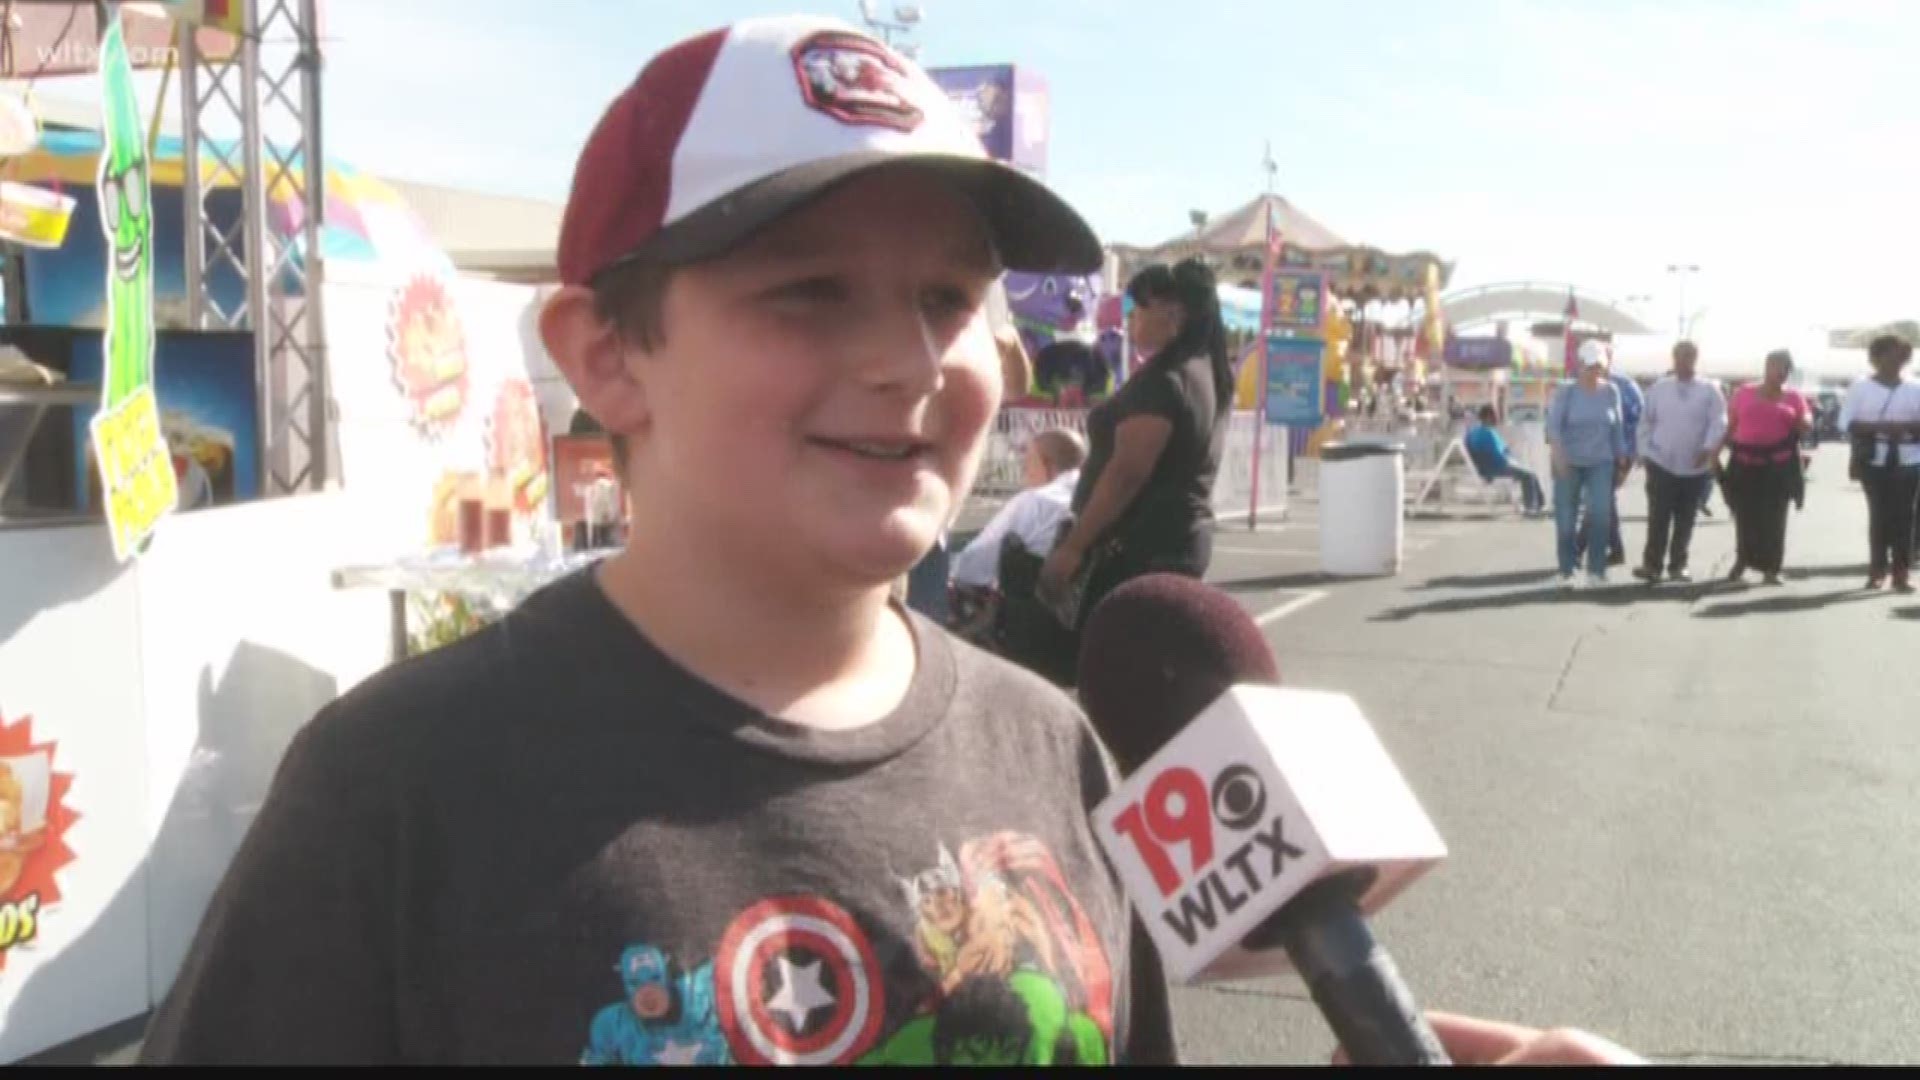 News 19's Whitney Sullivan got a chance to catch up with the fair's youngest fans 